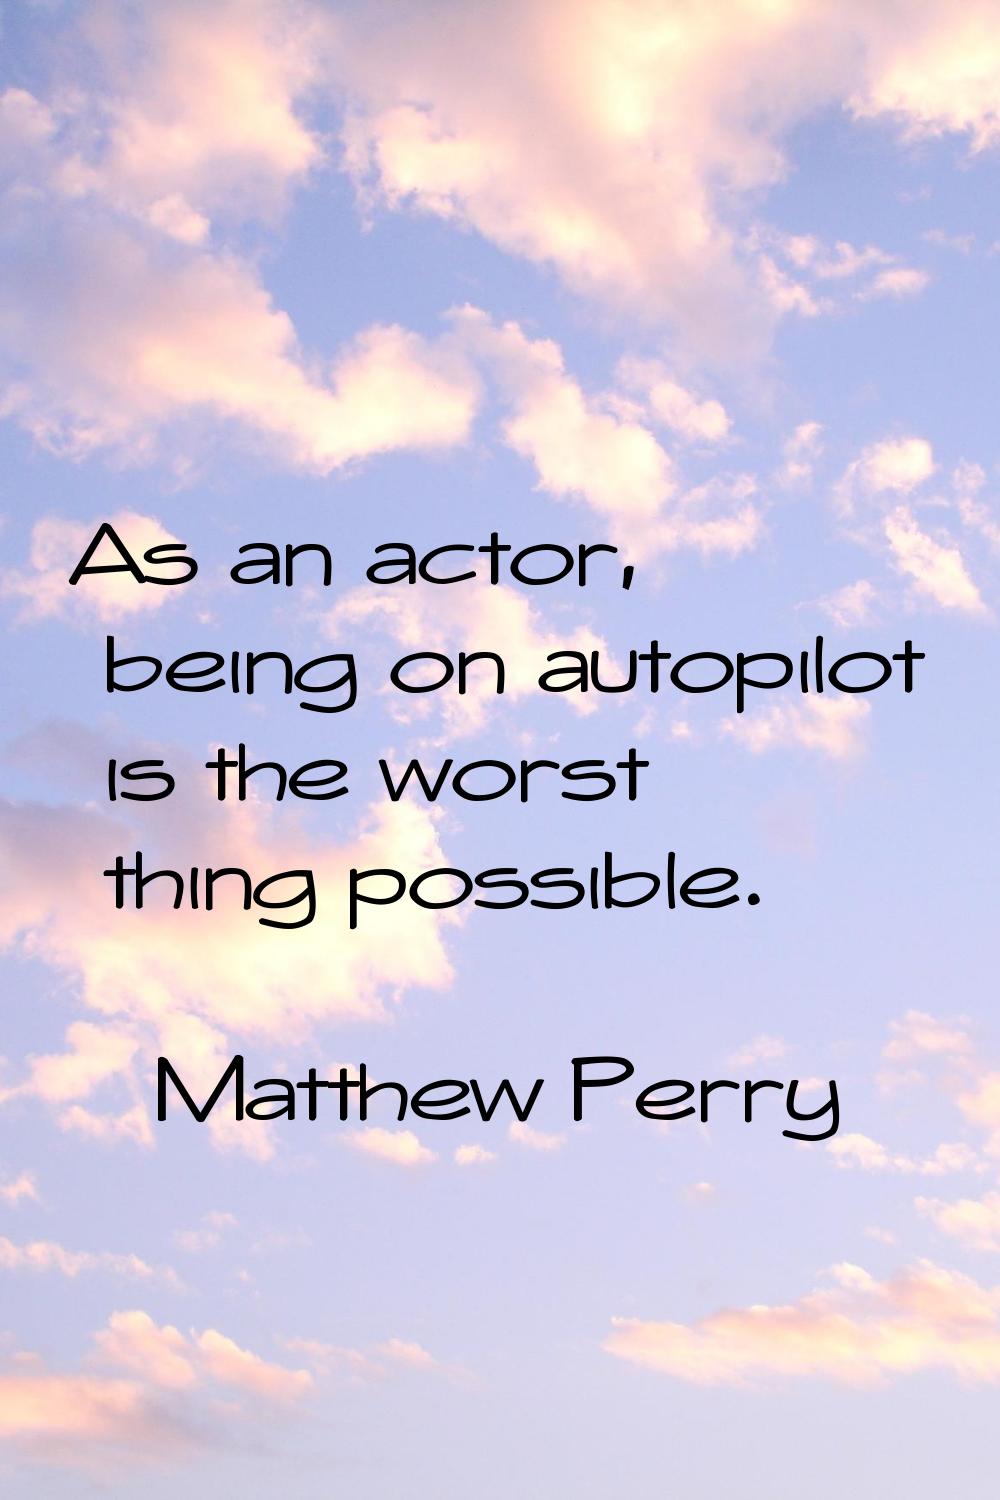 As an actor, being on autopilot is the worst thing possible.